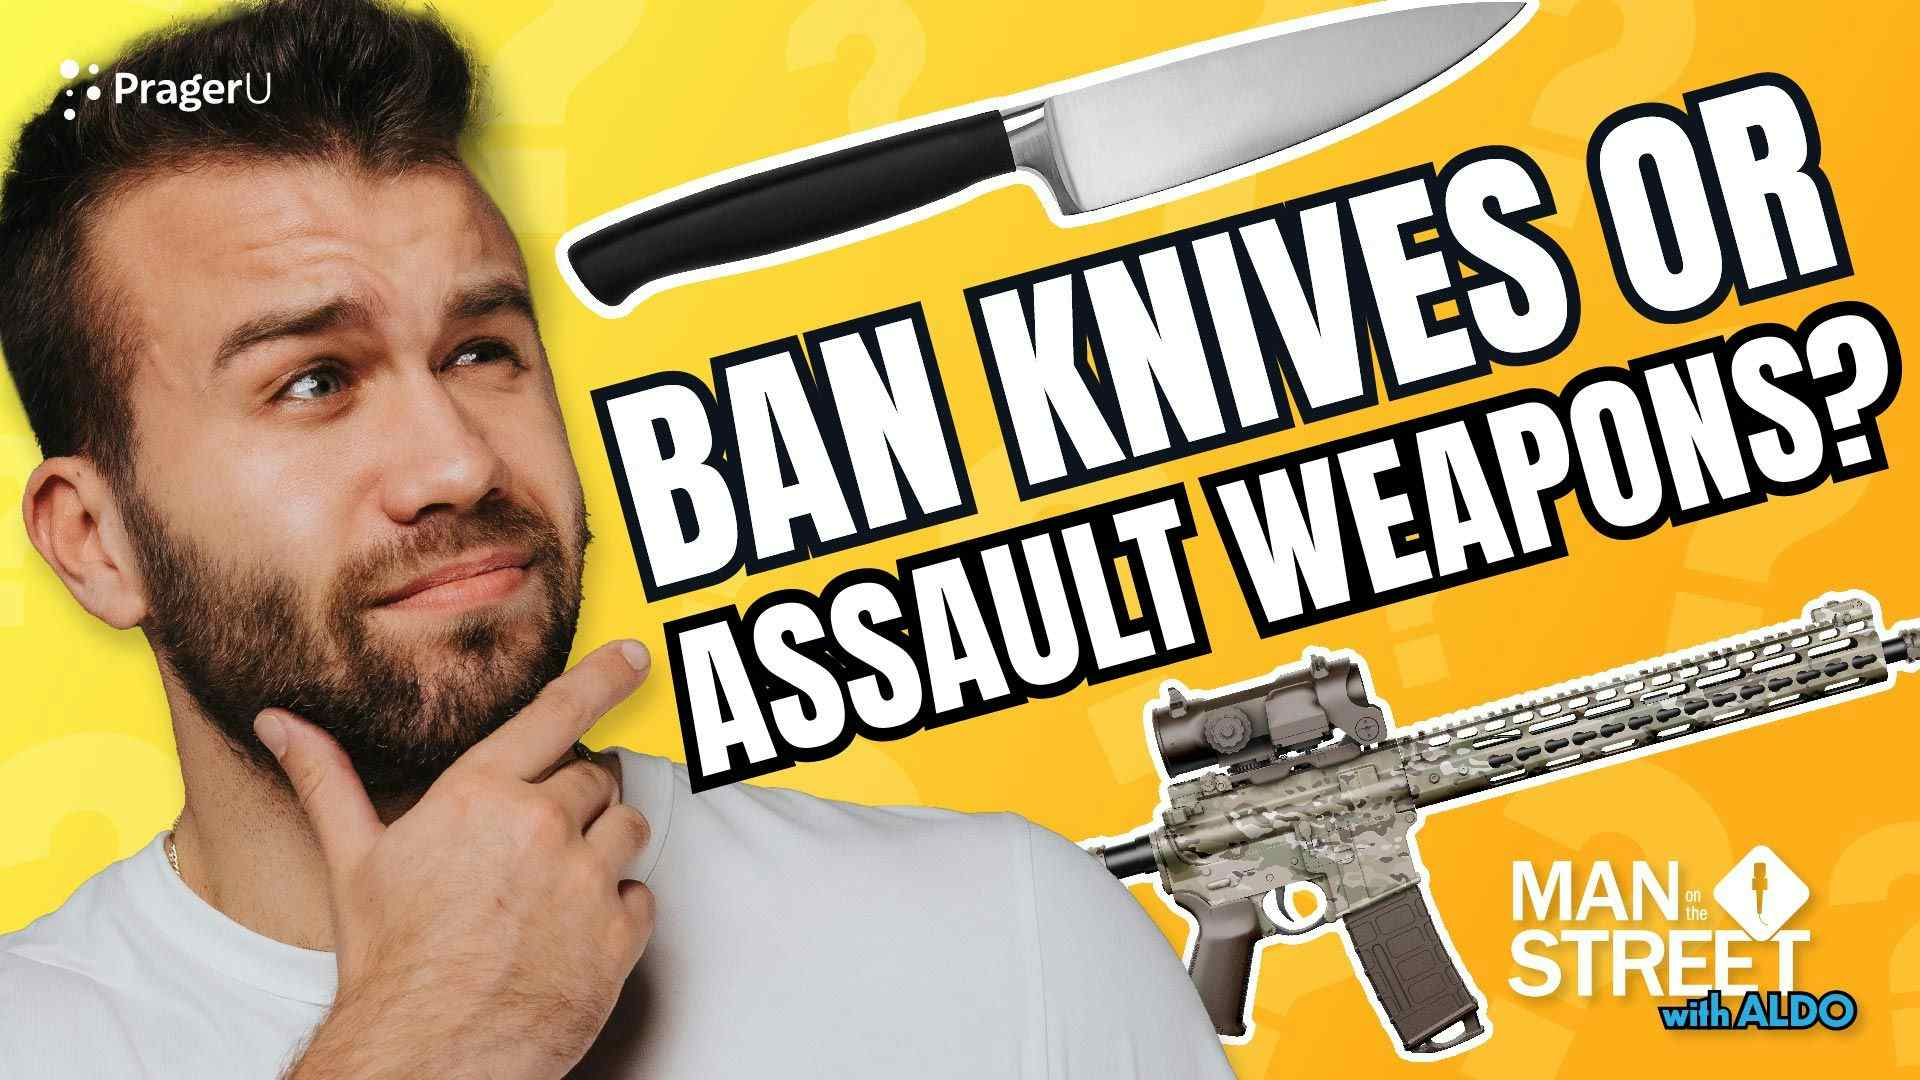 Are Knives More Dangerous than "Assault Weapons"?